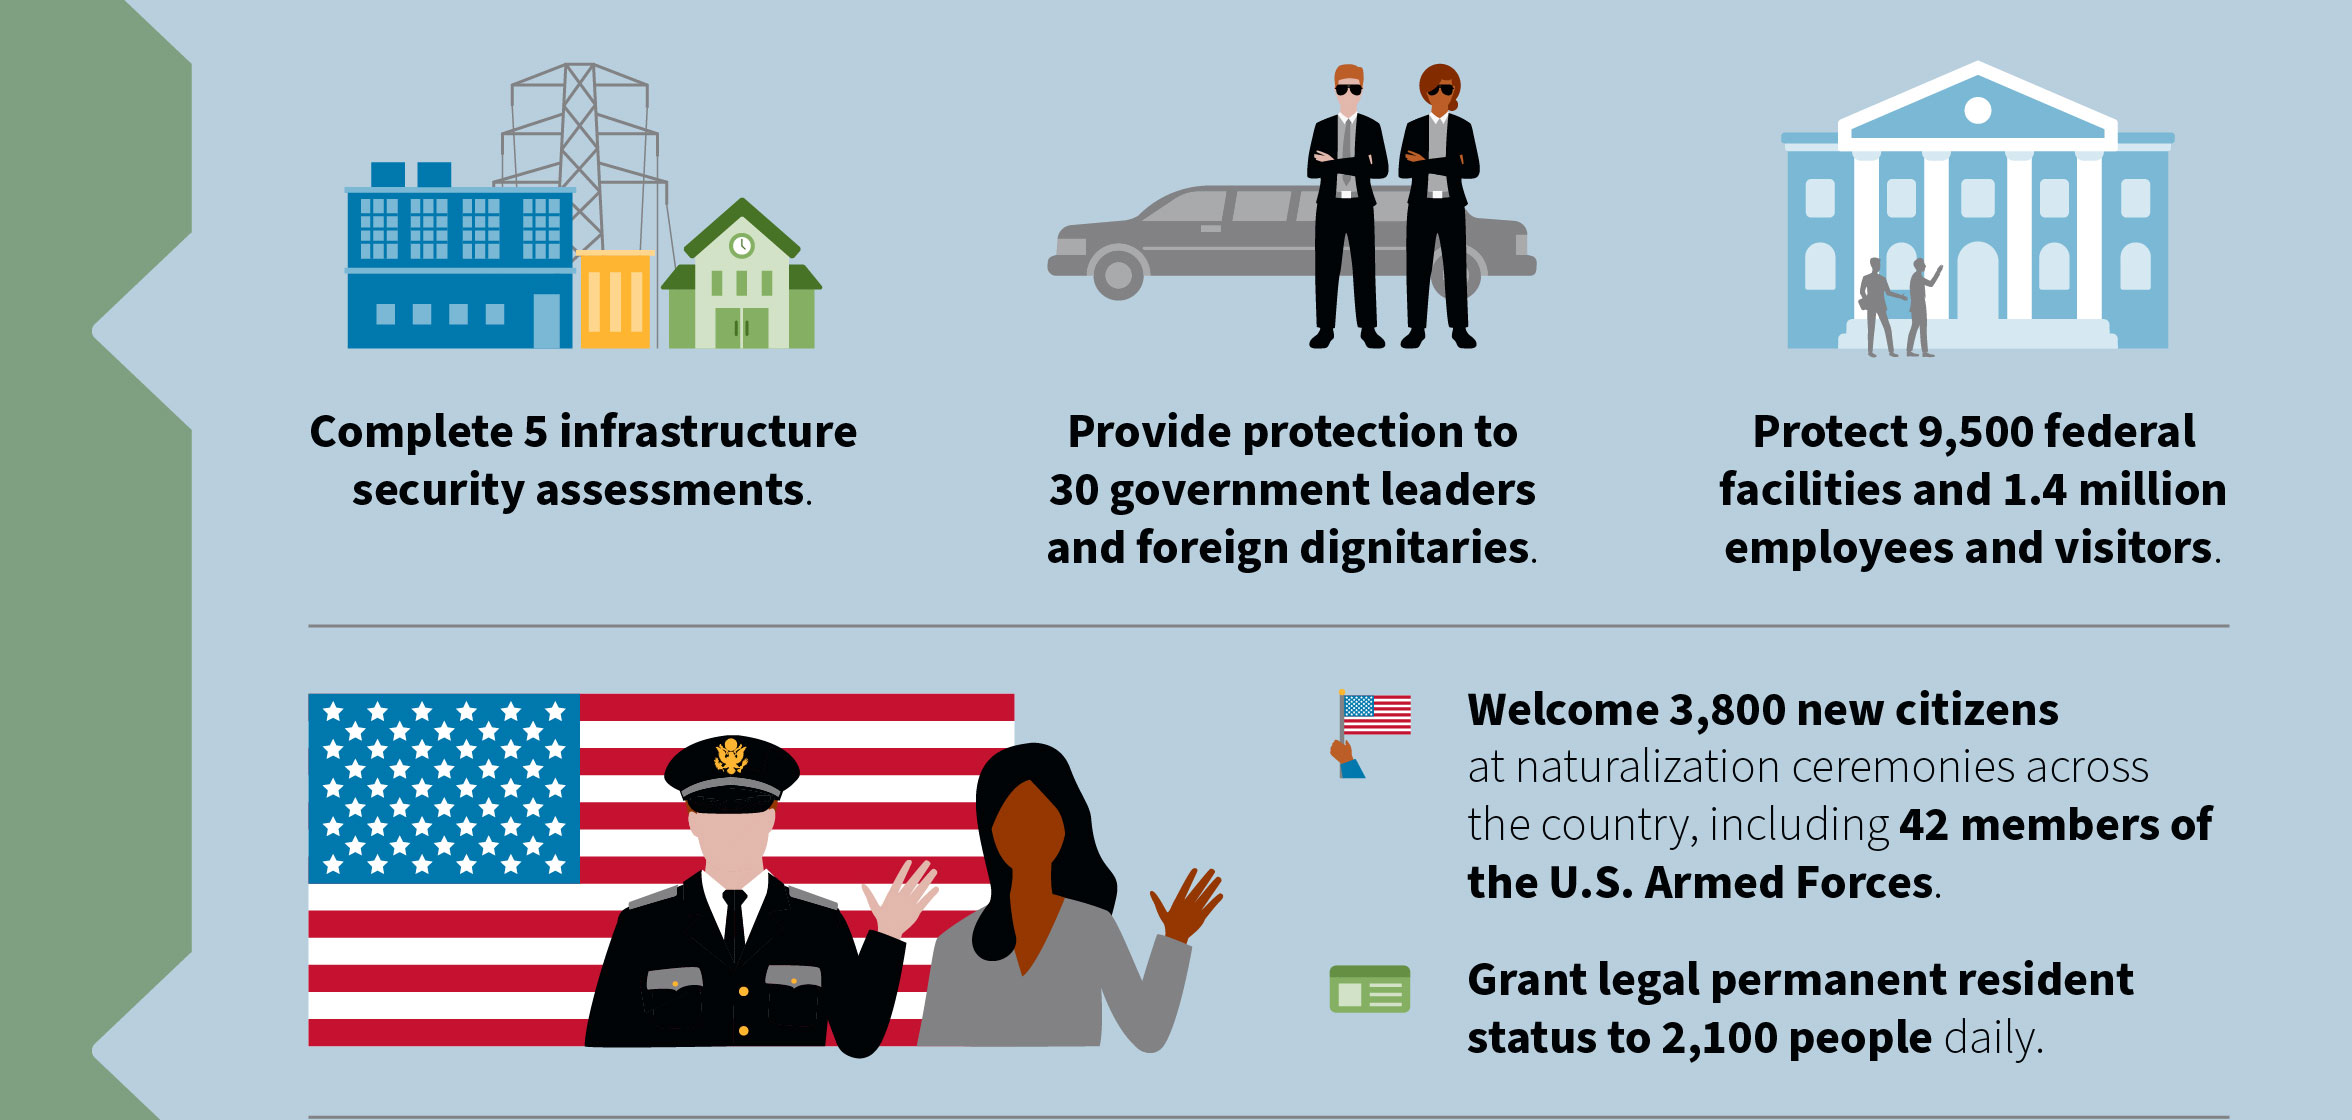 Complete 5 infrastructure security assessments. Provide protection to 30 government leaders and foreign dignitaries. Protect 9,500 federal facilities and 1.4 million employees and visitors. Welcome 3,800 new citizens at naturalization ceremonies across the country, including 42 members of the U.S. Armed Forces. Grant legal permanent resident status to 2,100 people daily.